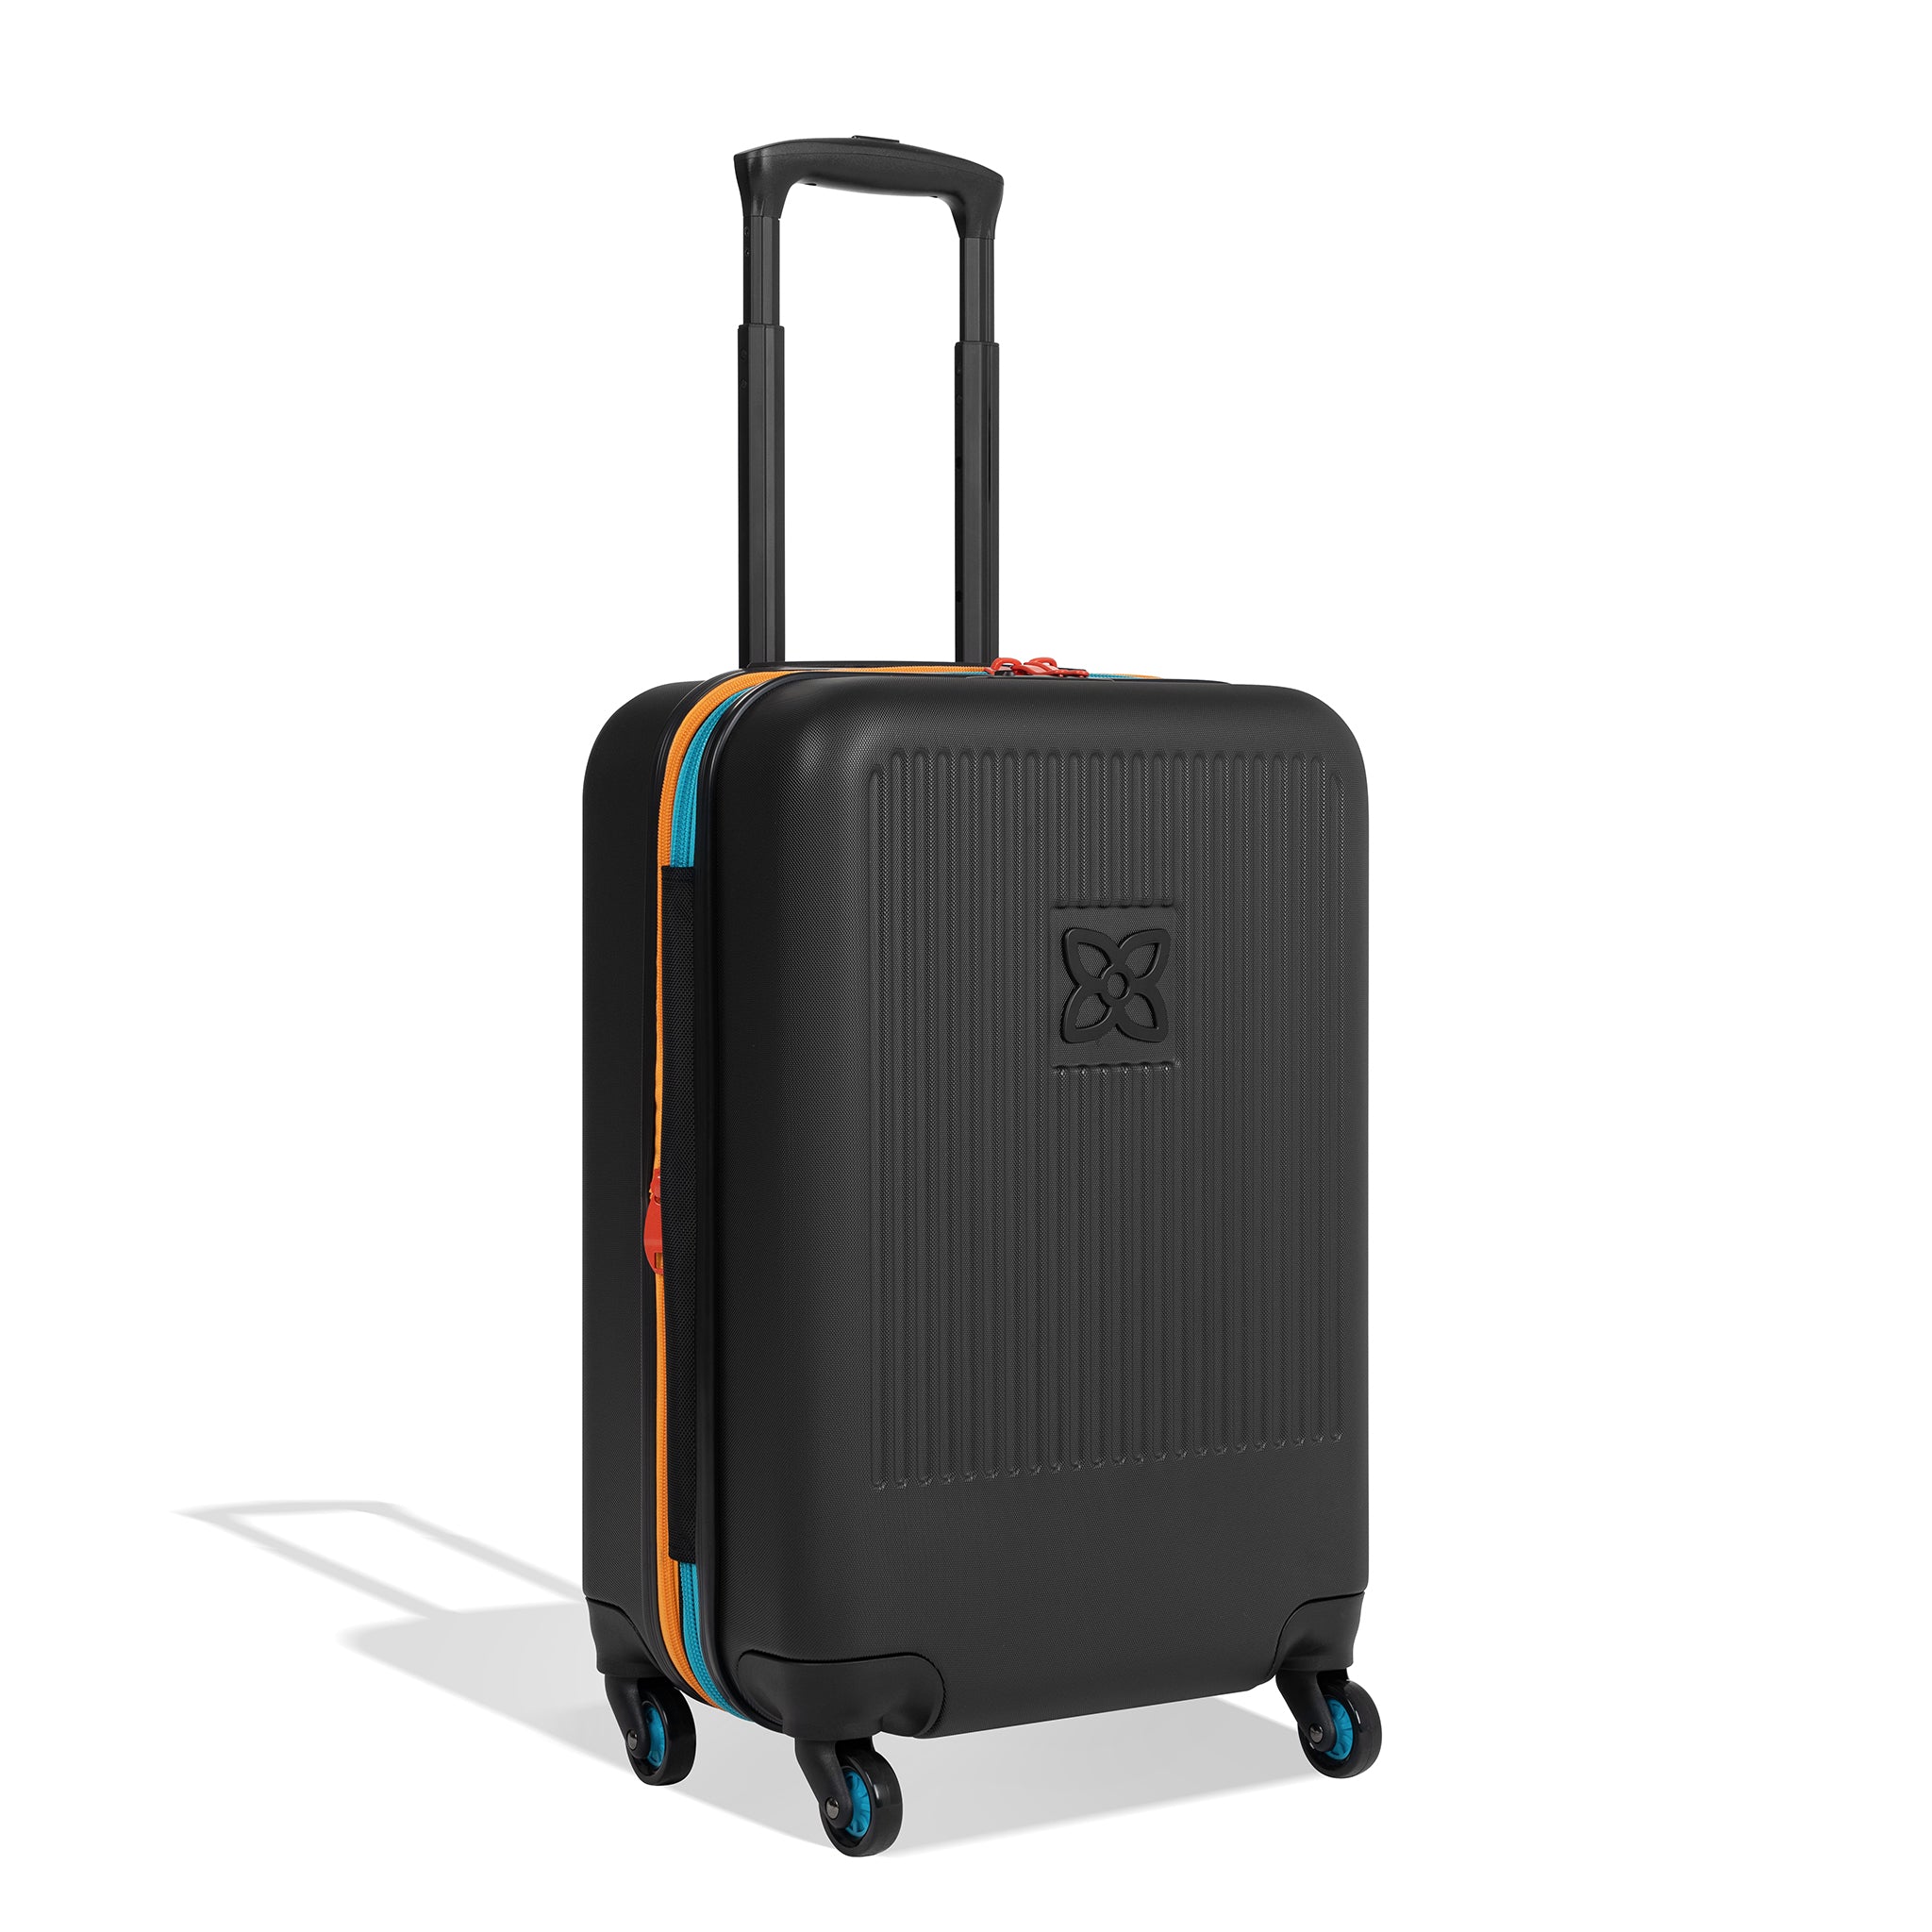 Angled front view of Sherpani hard-shell carry-on luggage, the Meridian in Chromatic. Meridian features include a retractable luggage handle, uncrushable exterior, TSA-approved locking zippers and four 36-degree spinner wheels. Chromatic color is primarily black with pops of color in red, yellow and blue. #color_chromatic